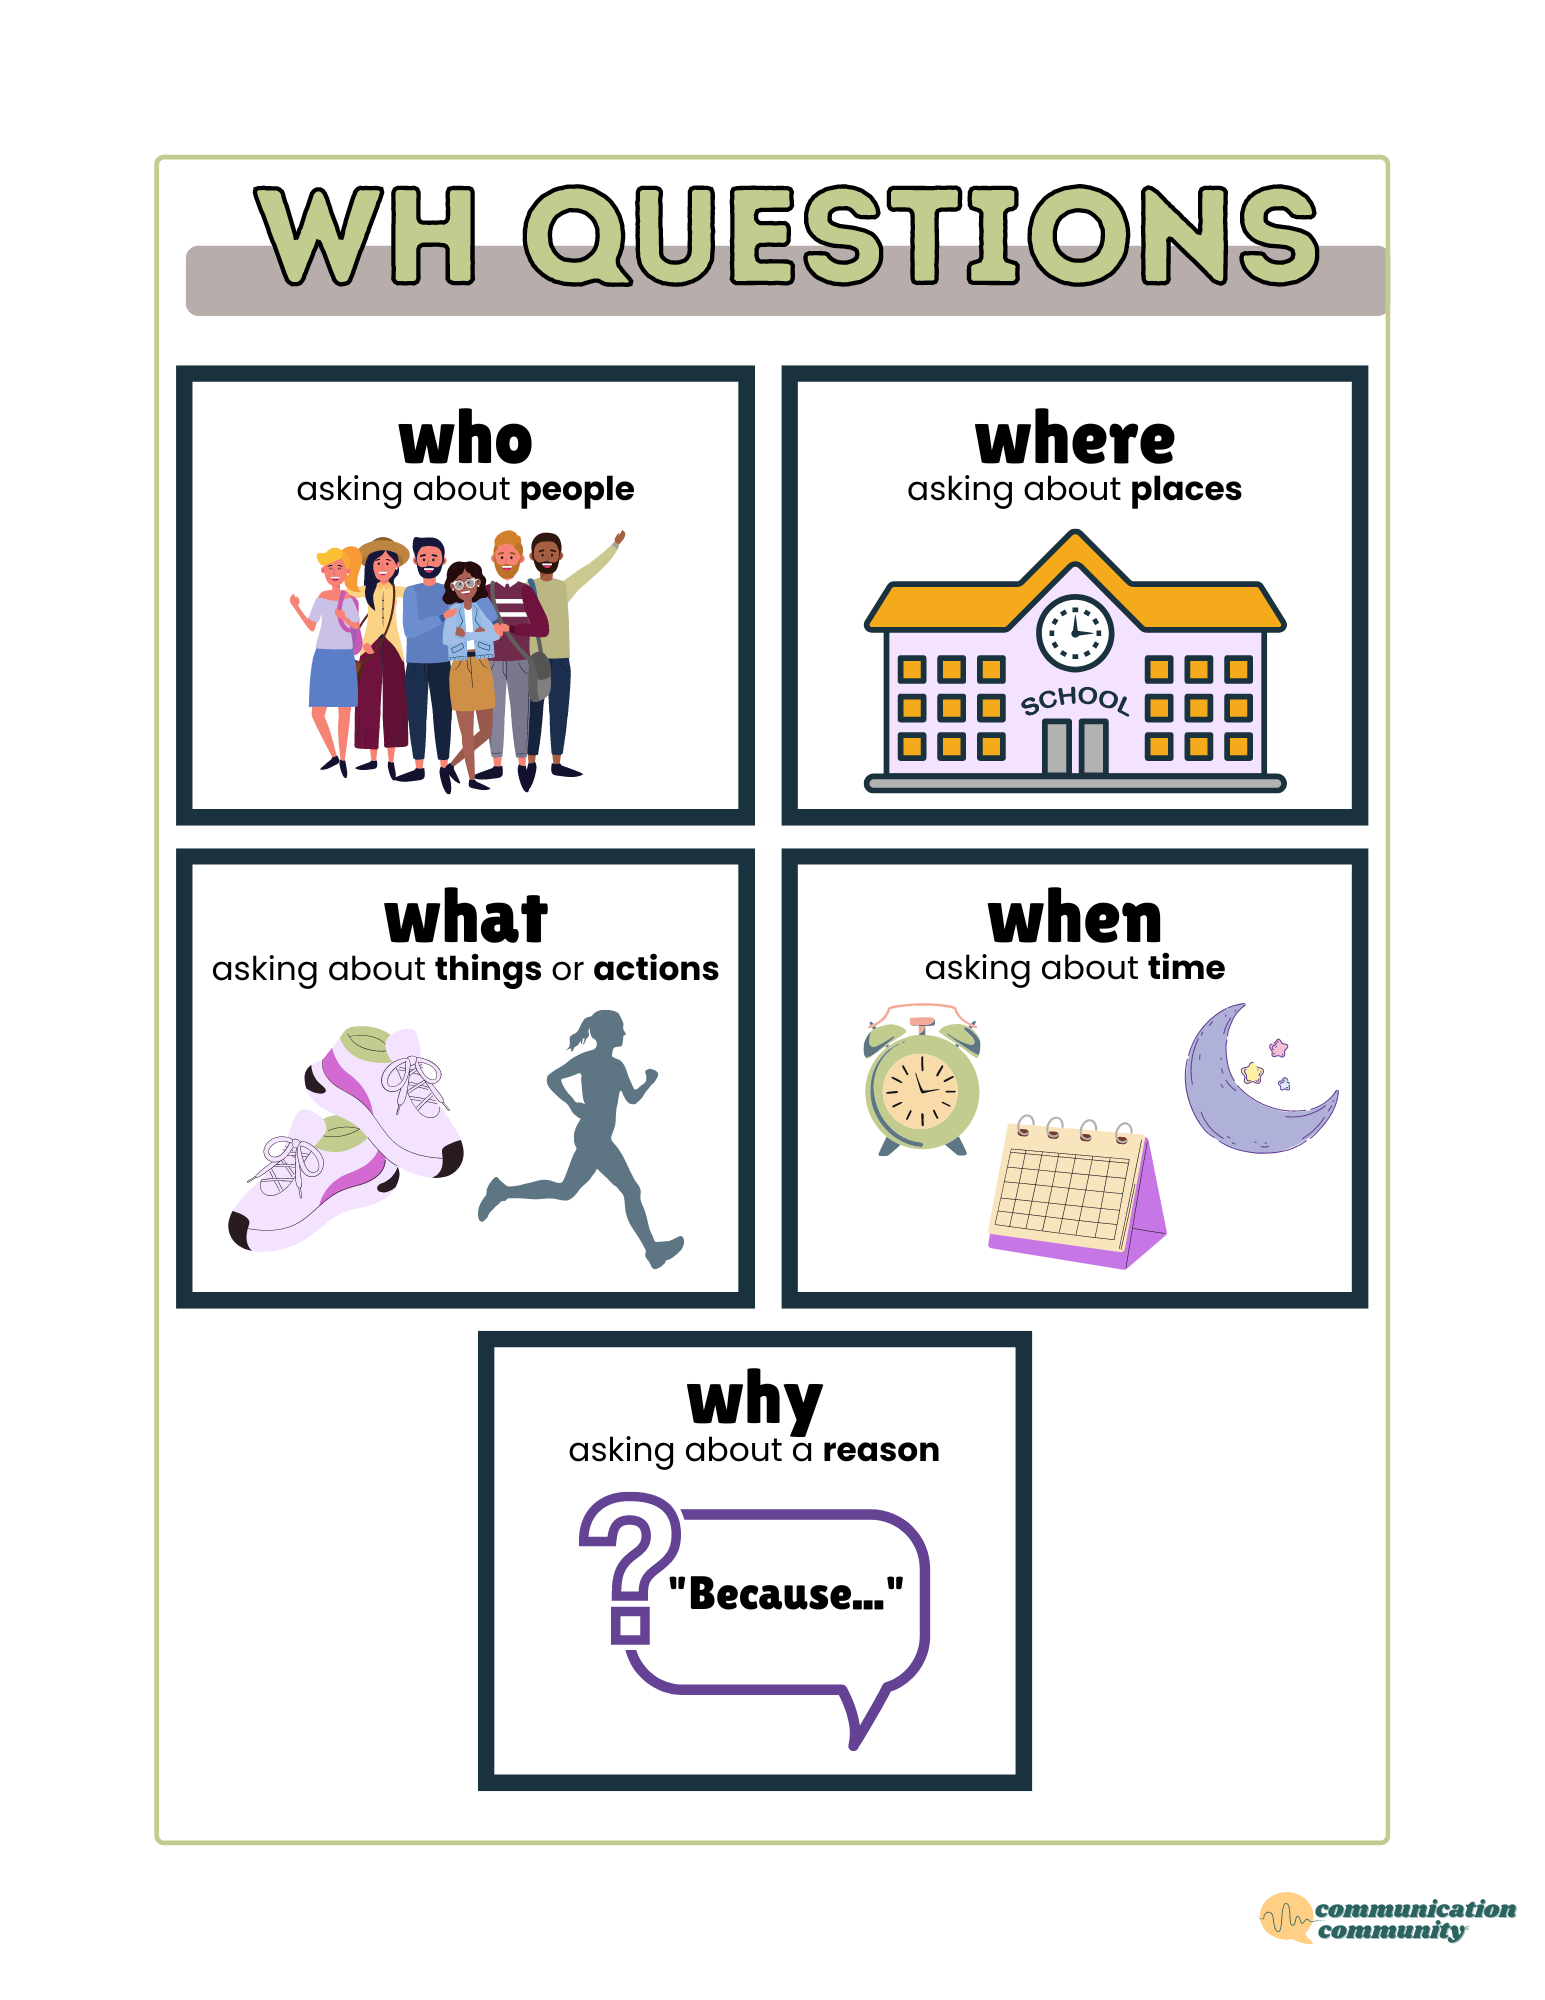 WH Questions for Speech Therapy: How to Target